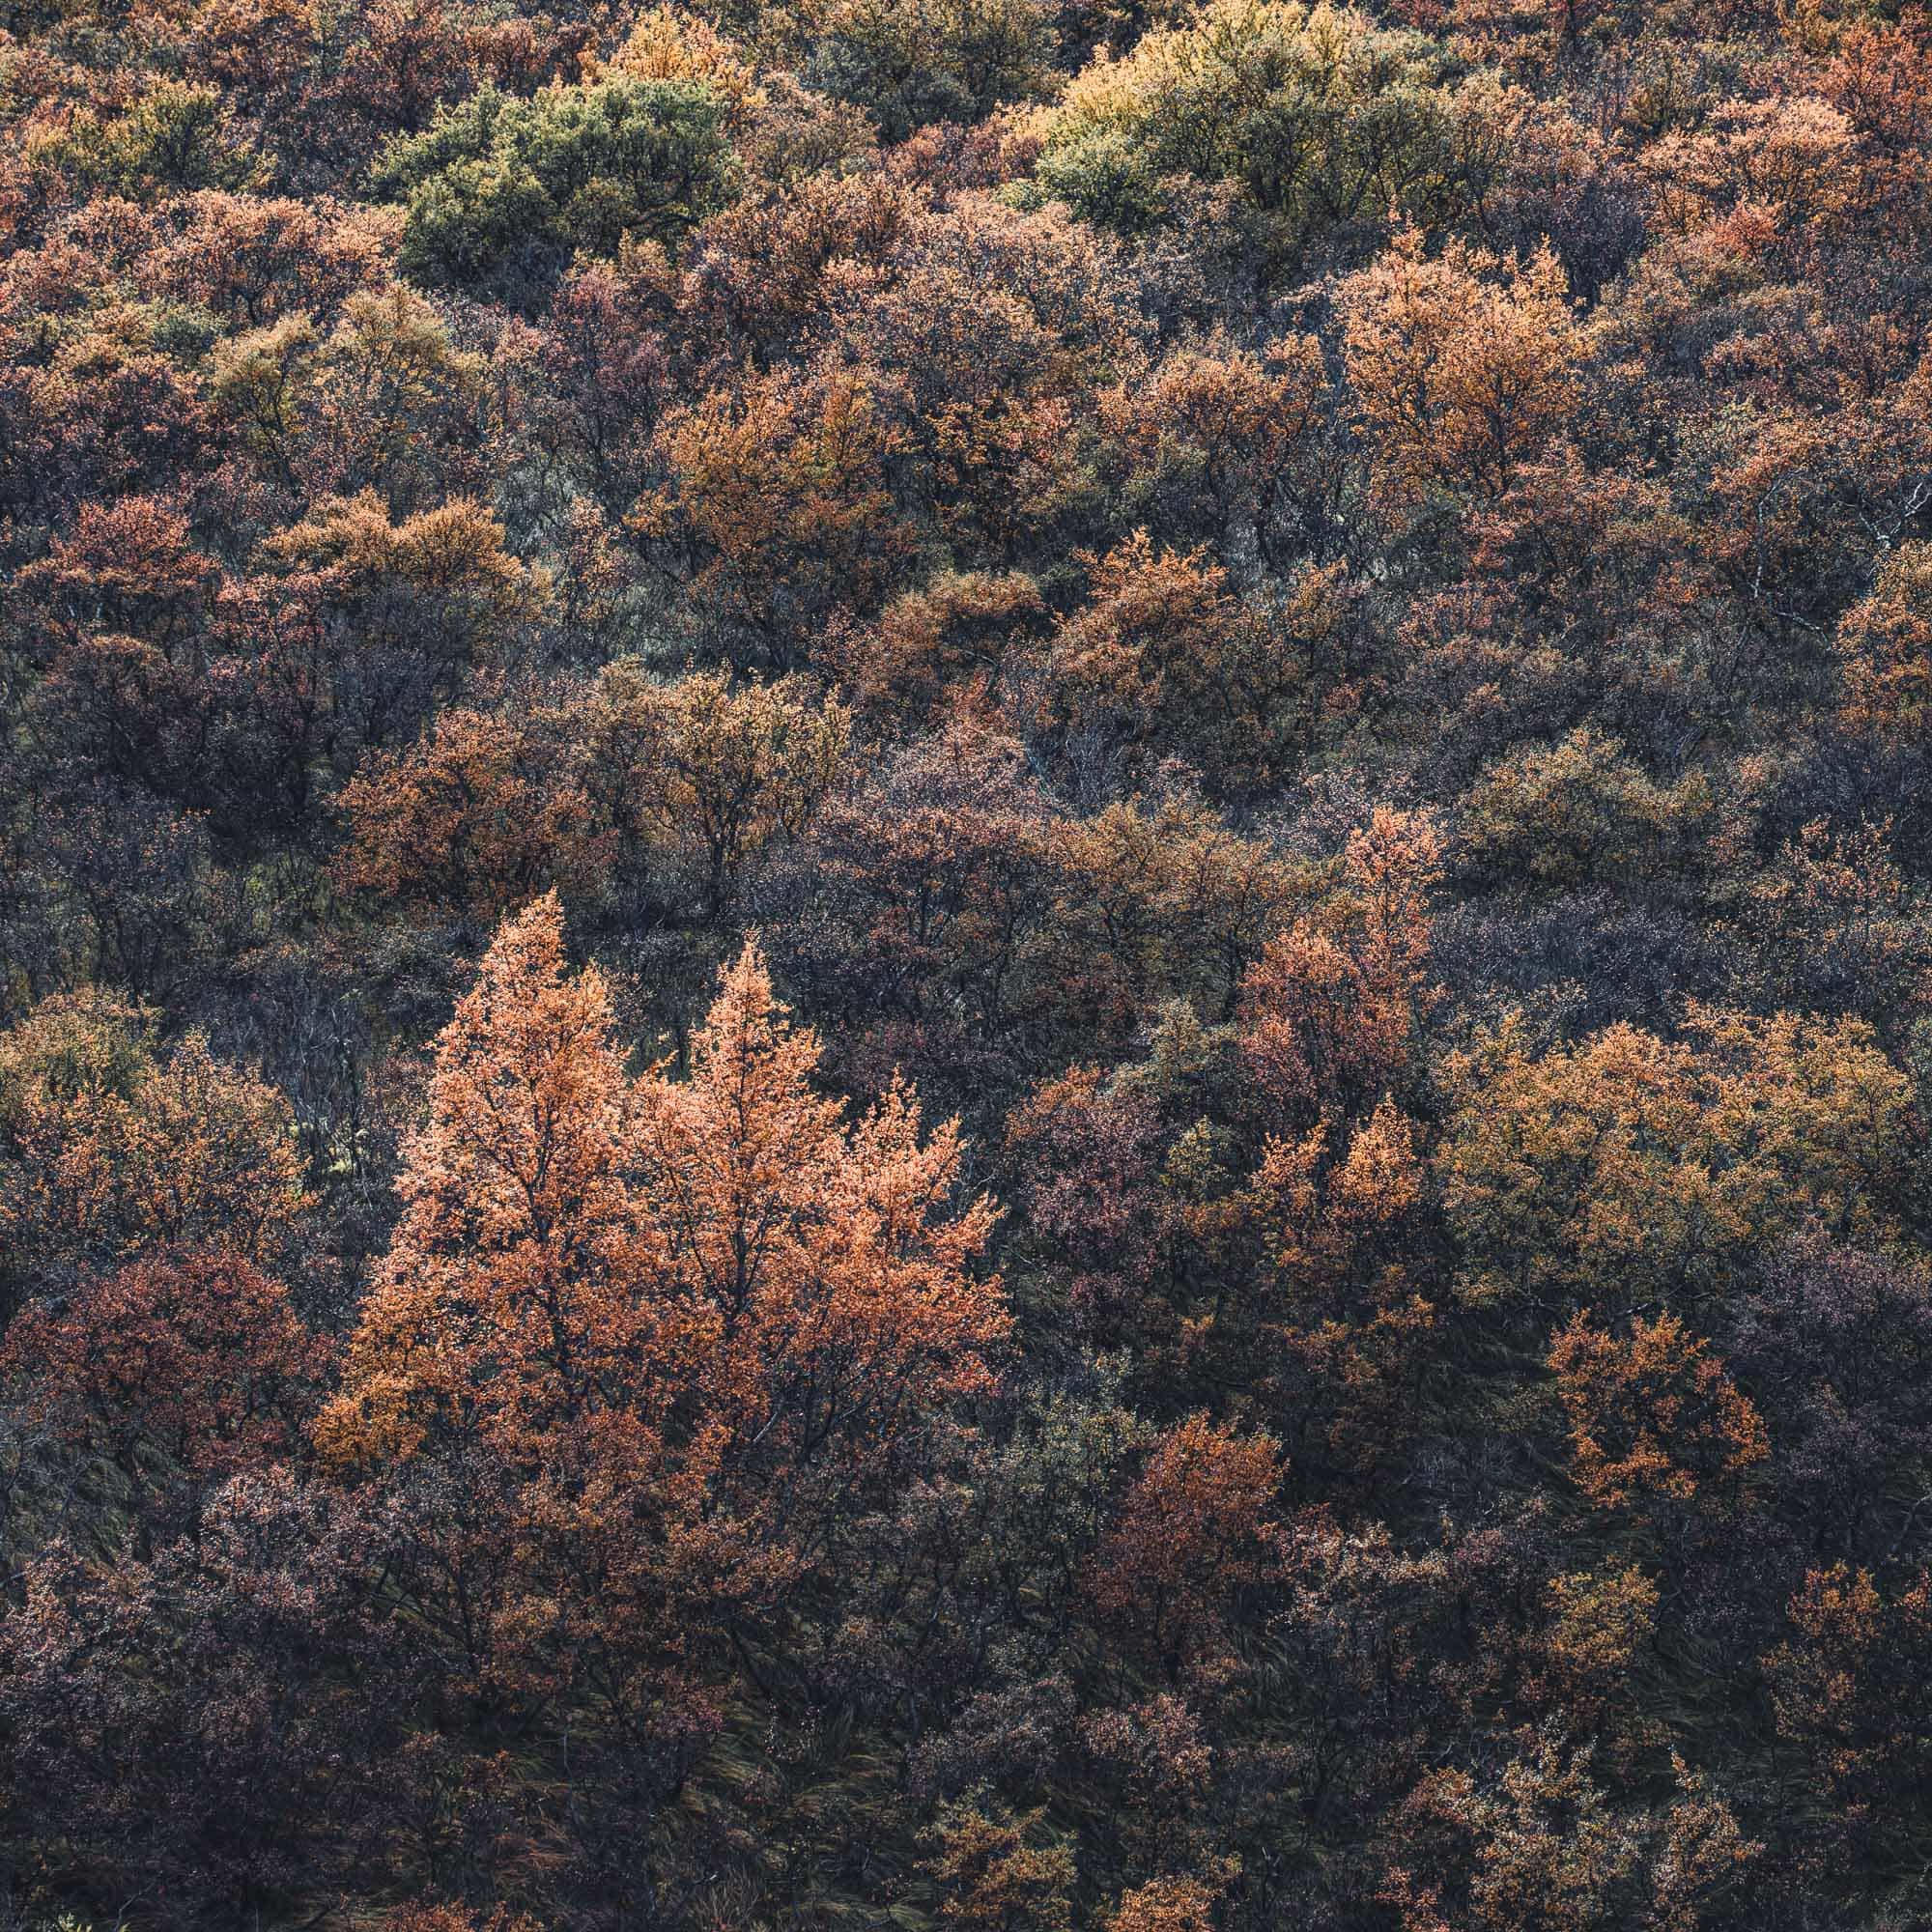 Two prominently orange trees stand out amidst the muted autumn colors of Vatnajökull National Park's dense forest.